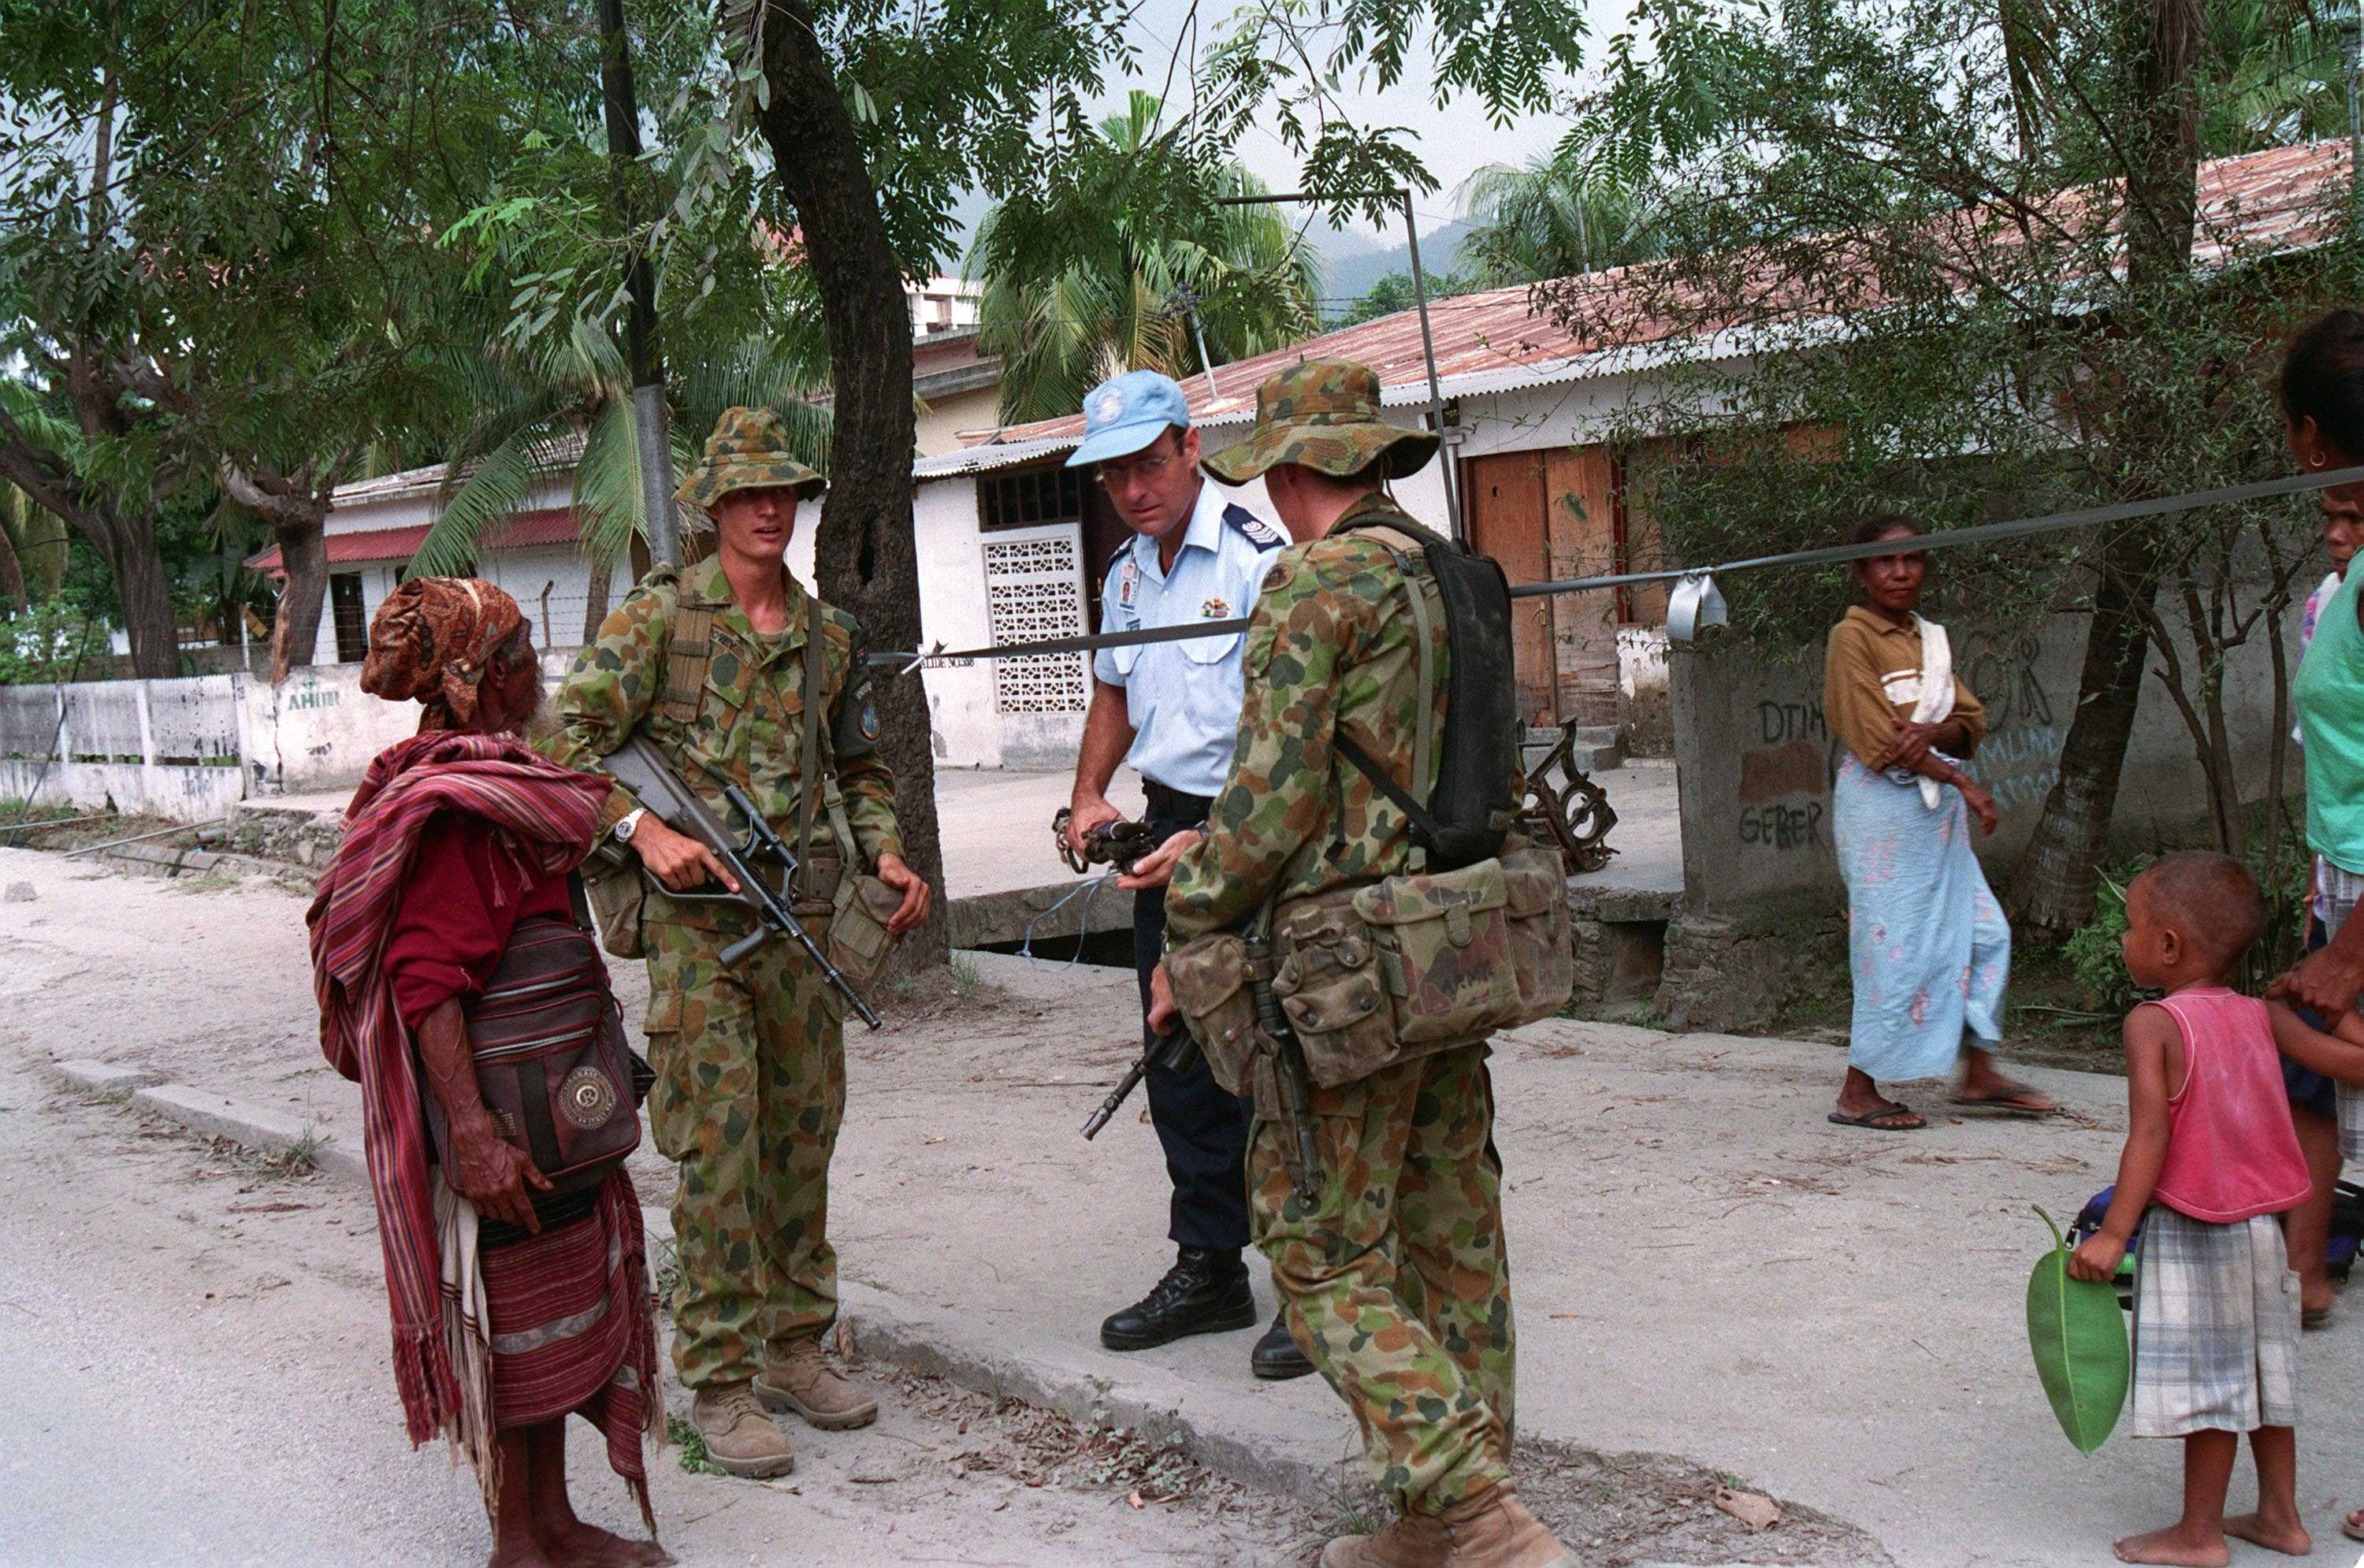 Australian members of International Forces East Timor (INTERFET), talk to a citizen in Dili, East Timor. (Photo by PH3 Dan Mennuto)